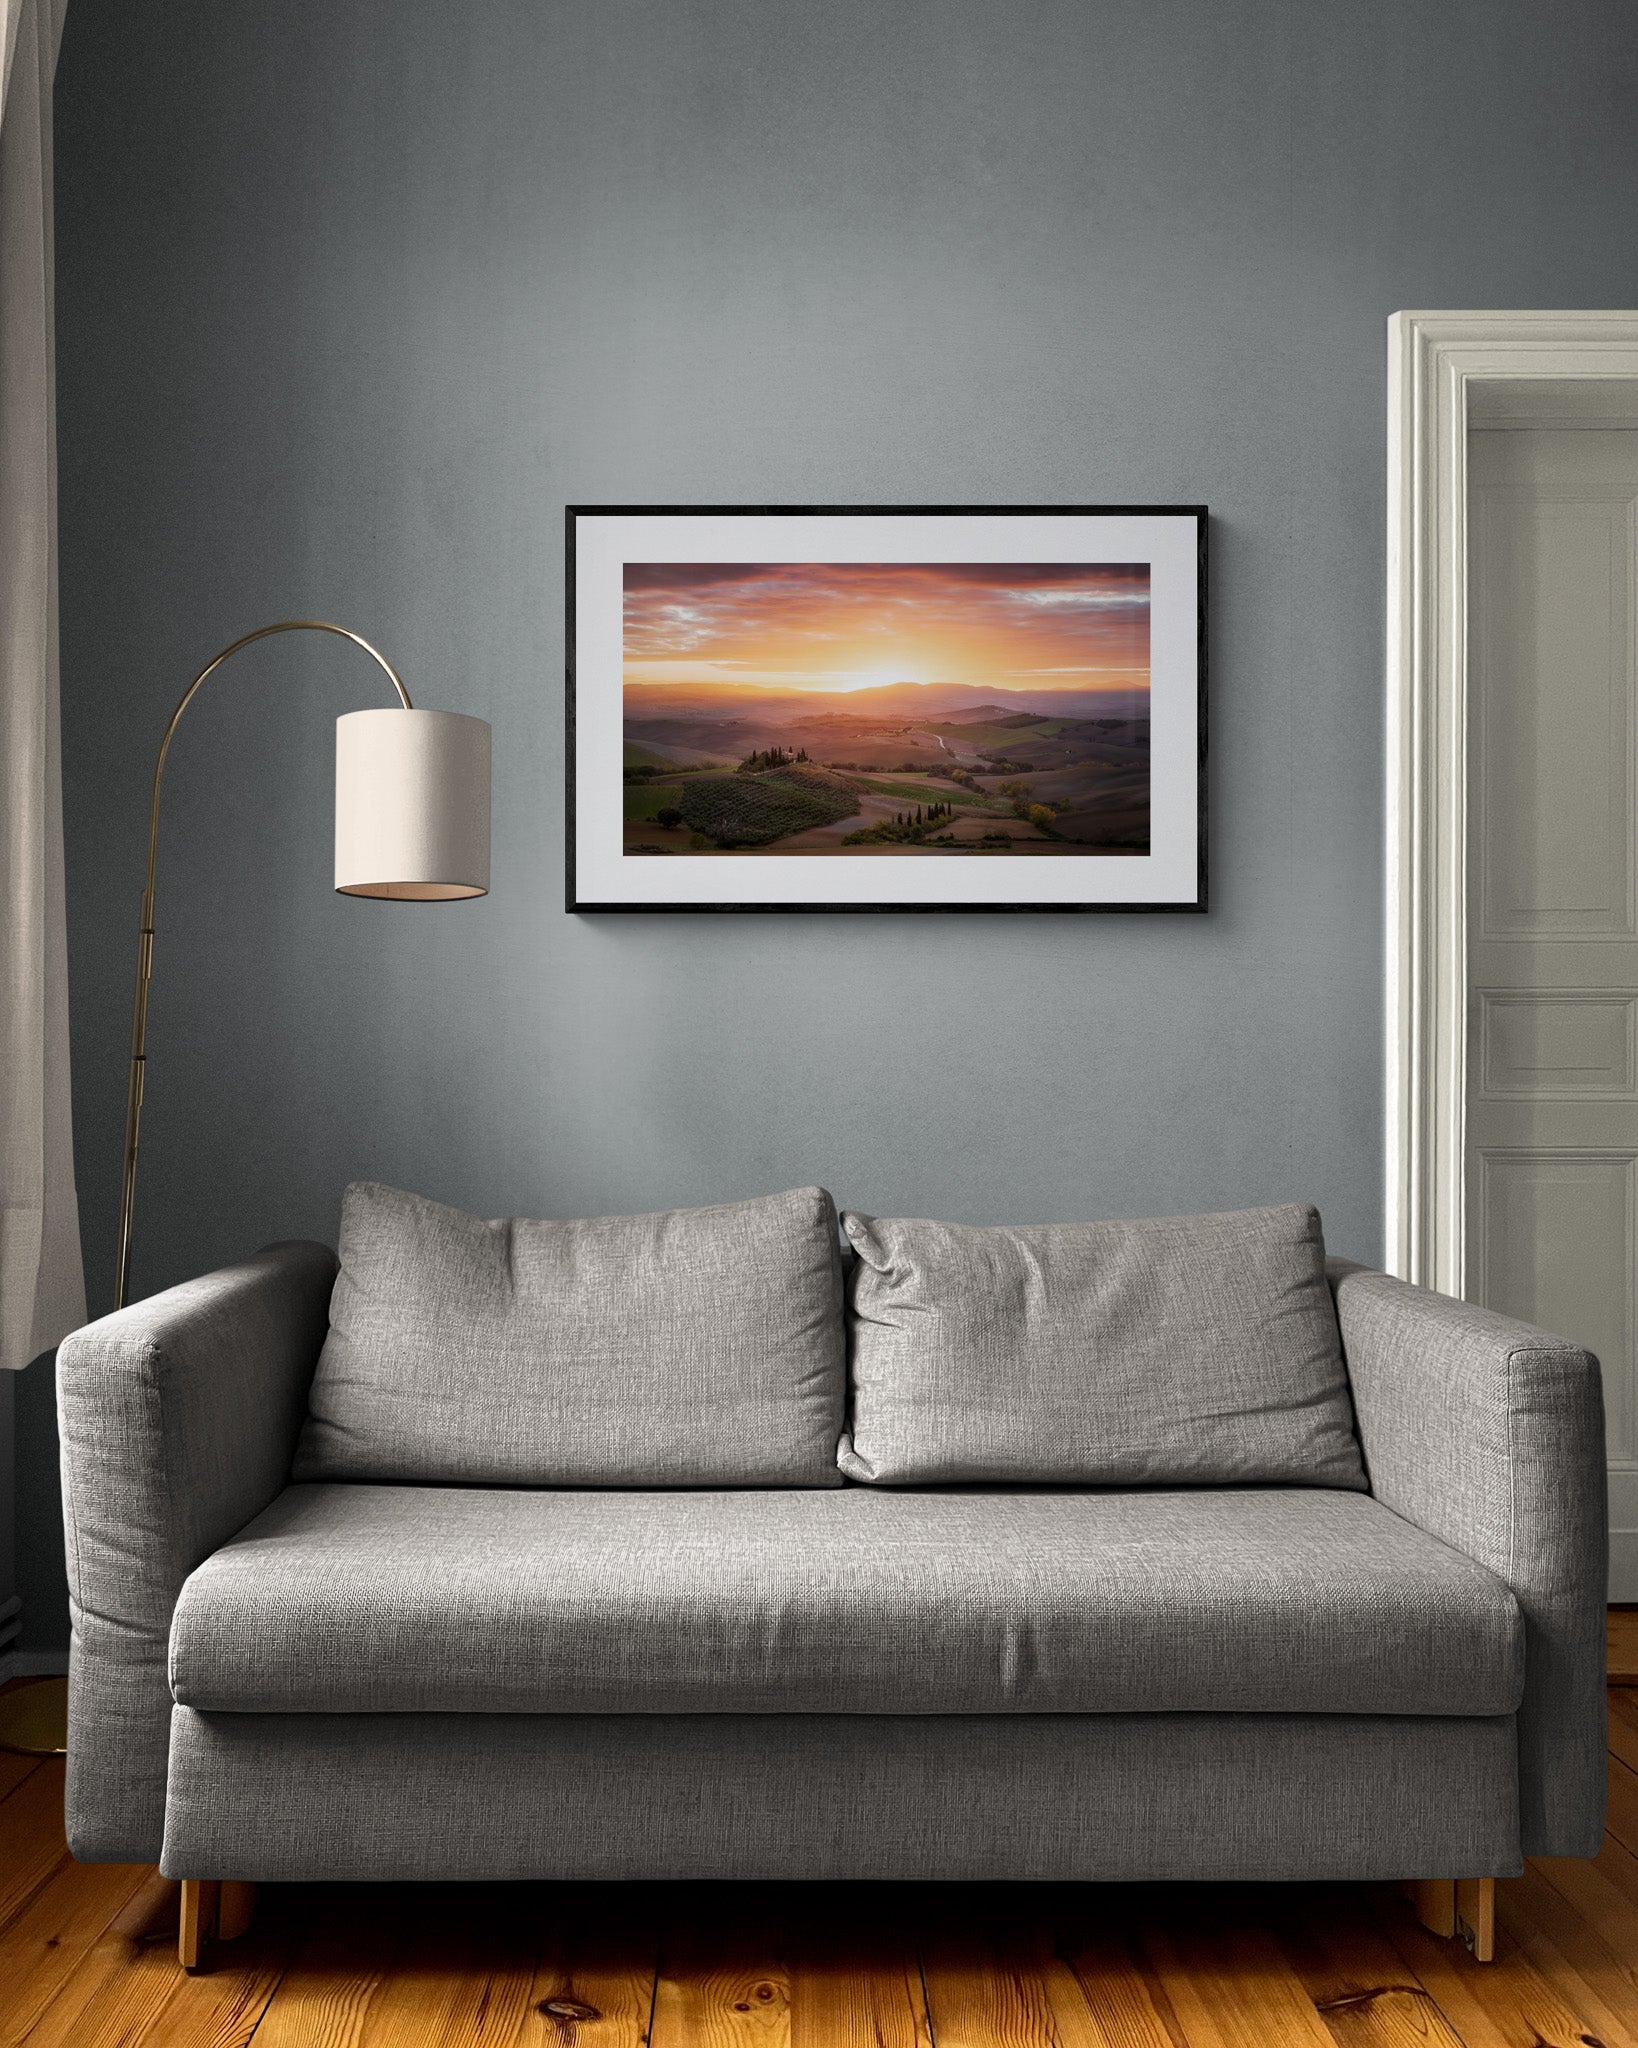 Image Title: Morning Glory Photographer: Marcus Danz Location: Val D'orcia, Italy Image description: The rolling hills of Tuscany and Podere Belvedere are caressed by the soft light of the morning sky. High quality Fine Art print up to 36 inch / around 90 centimeters on Hahnemühle paper available. Large variant in living room.